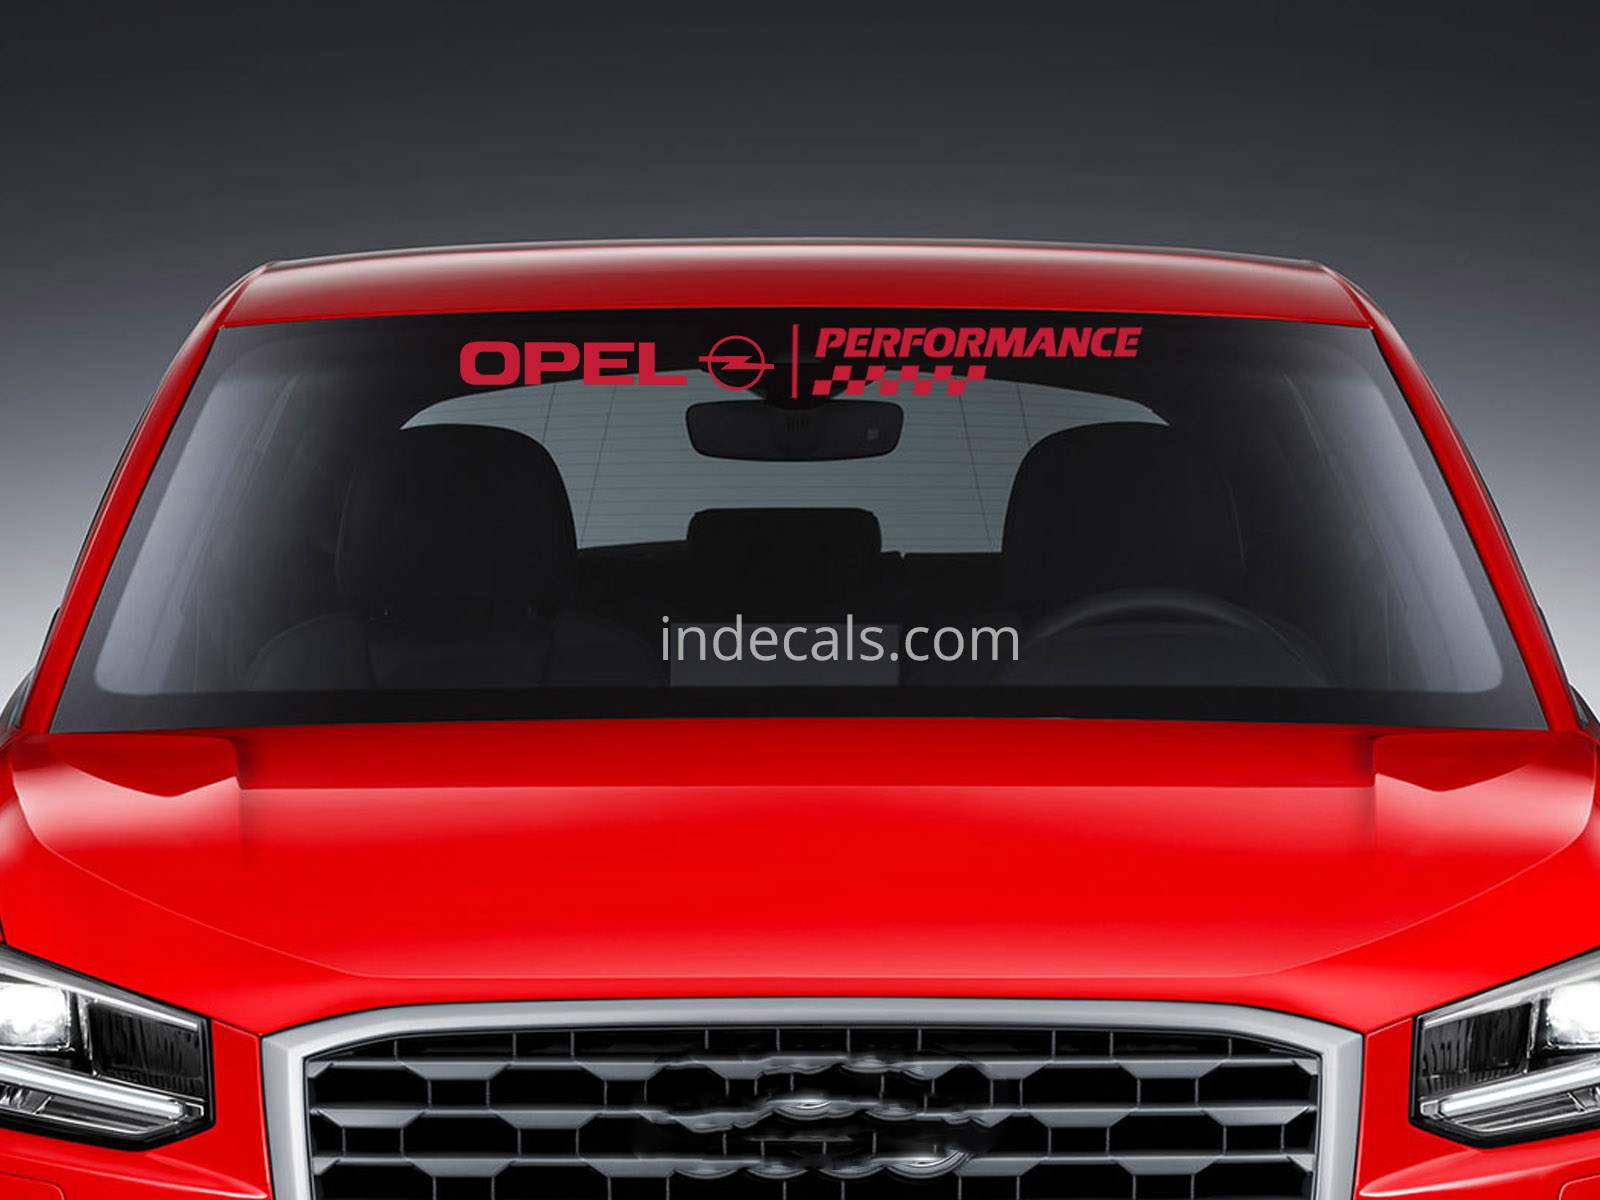 1 x Opel Performance Sticker for Windshield or Back Window - Red